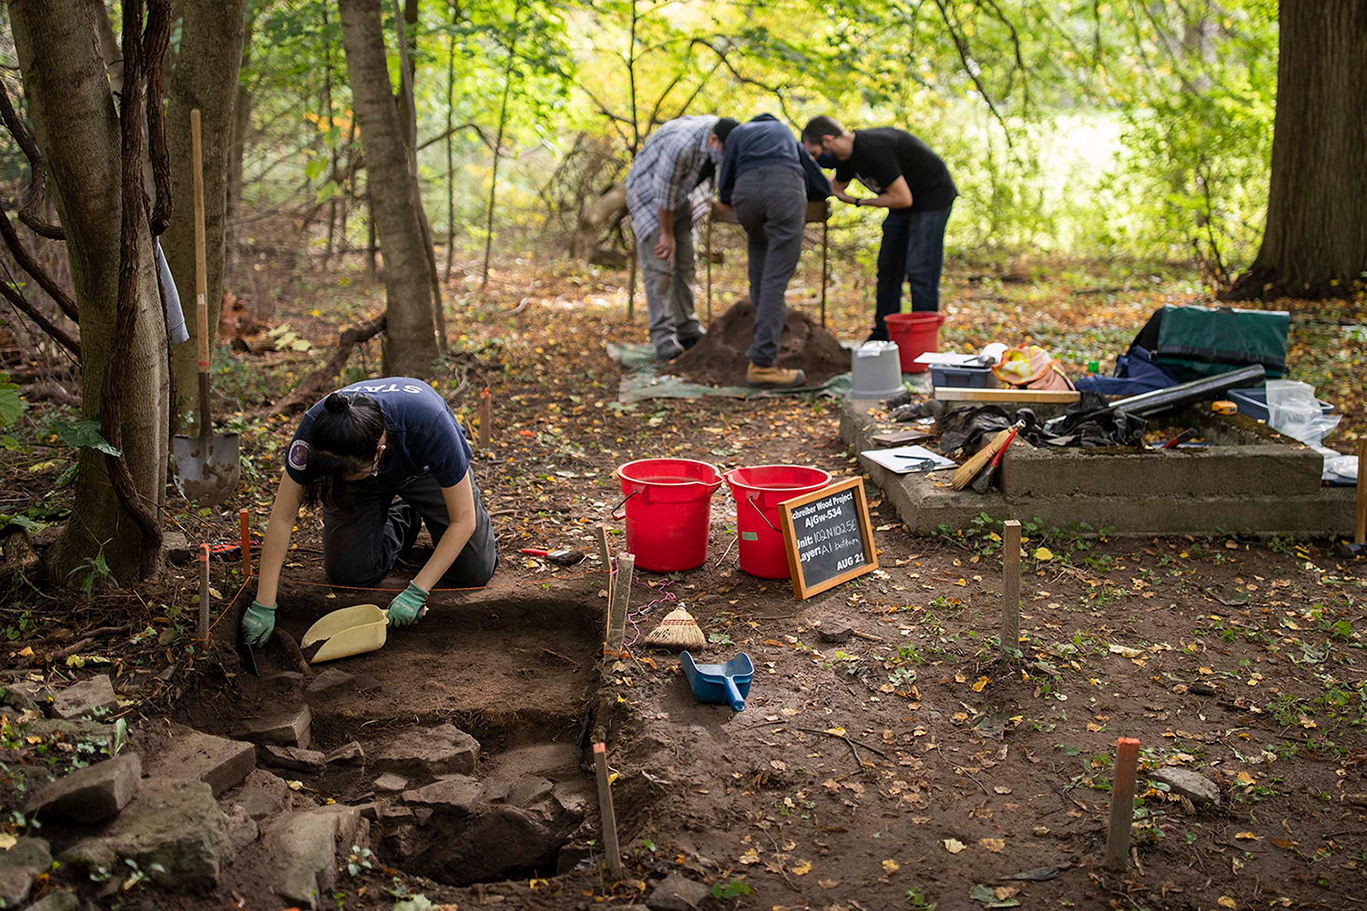 Student in the foreground digging in a sectioned off area, three students in the background examining a pile of dirt